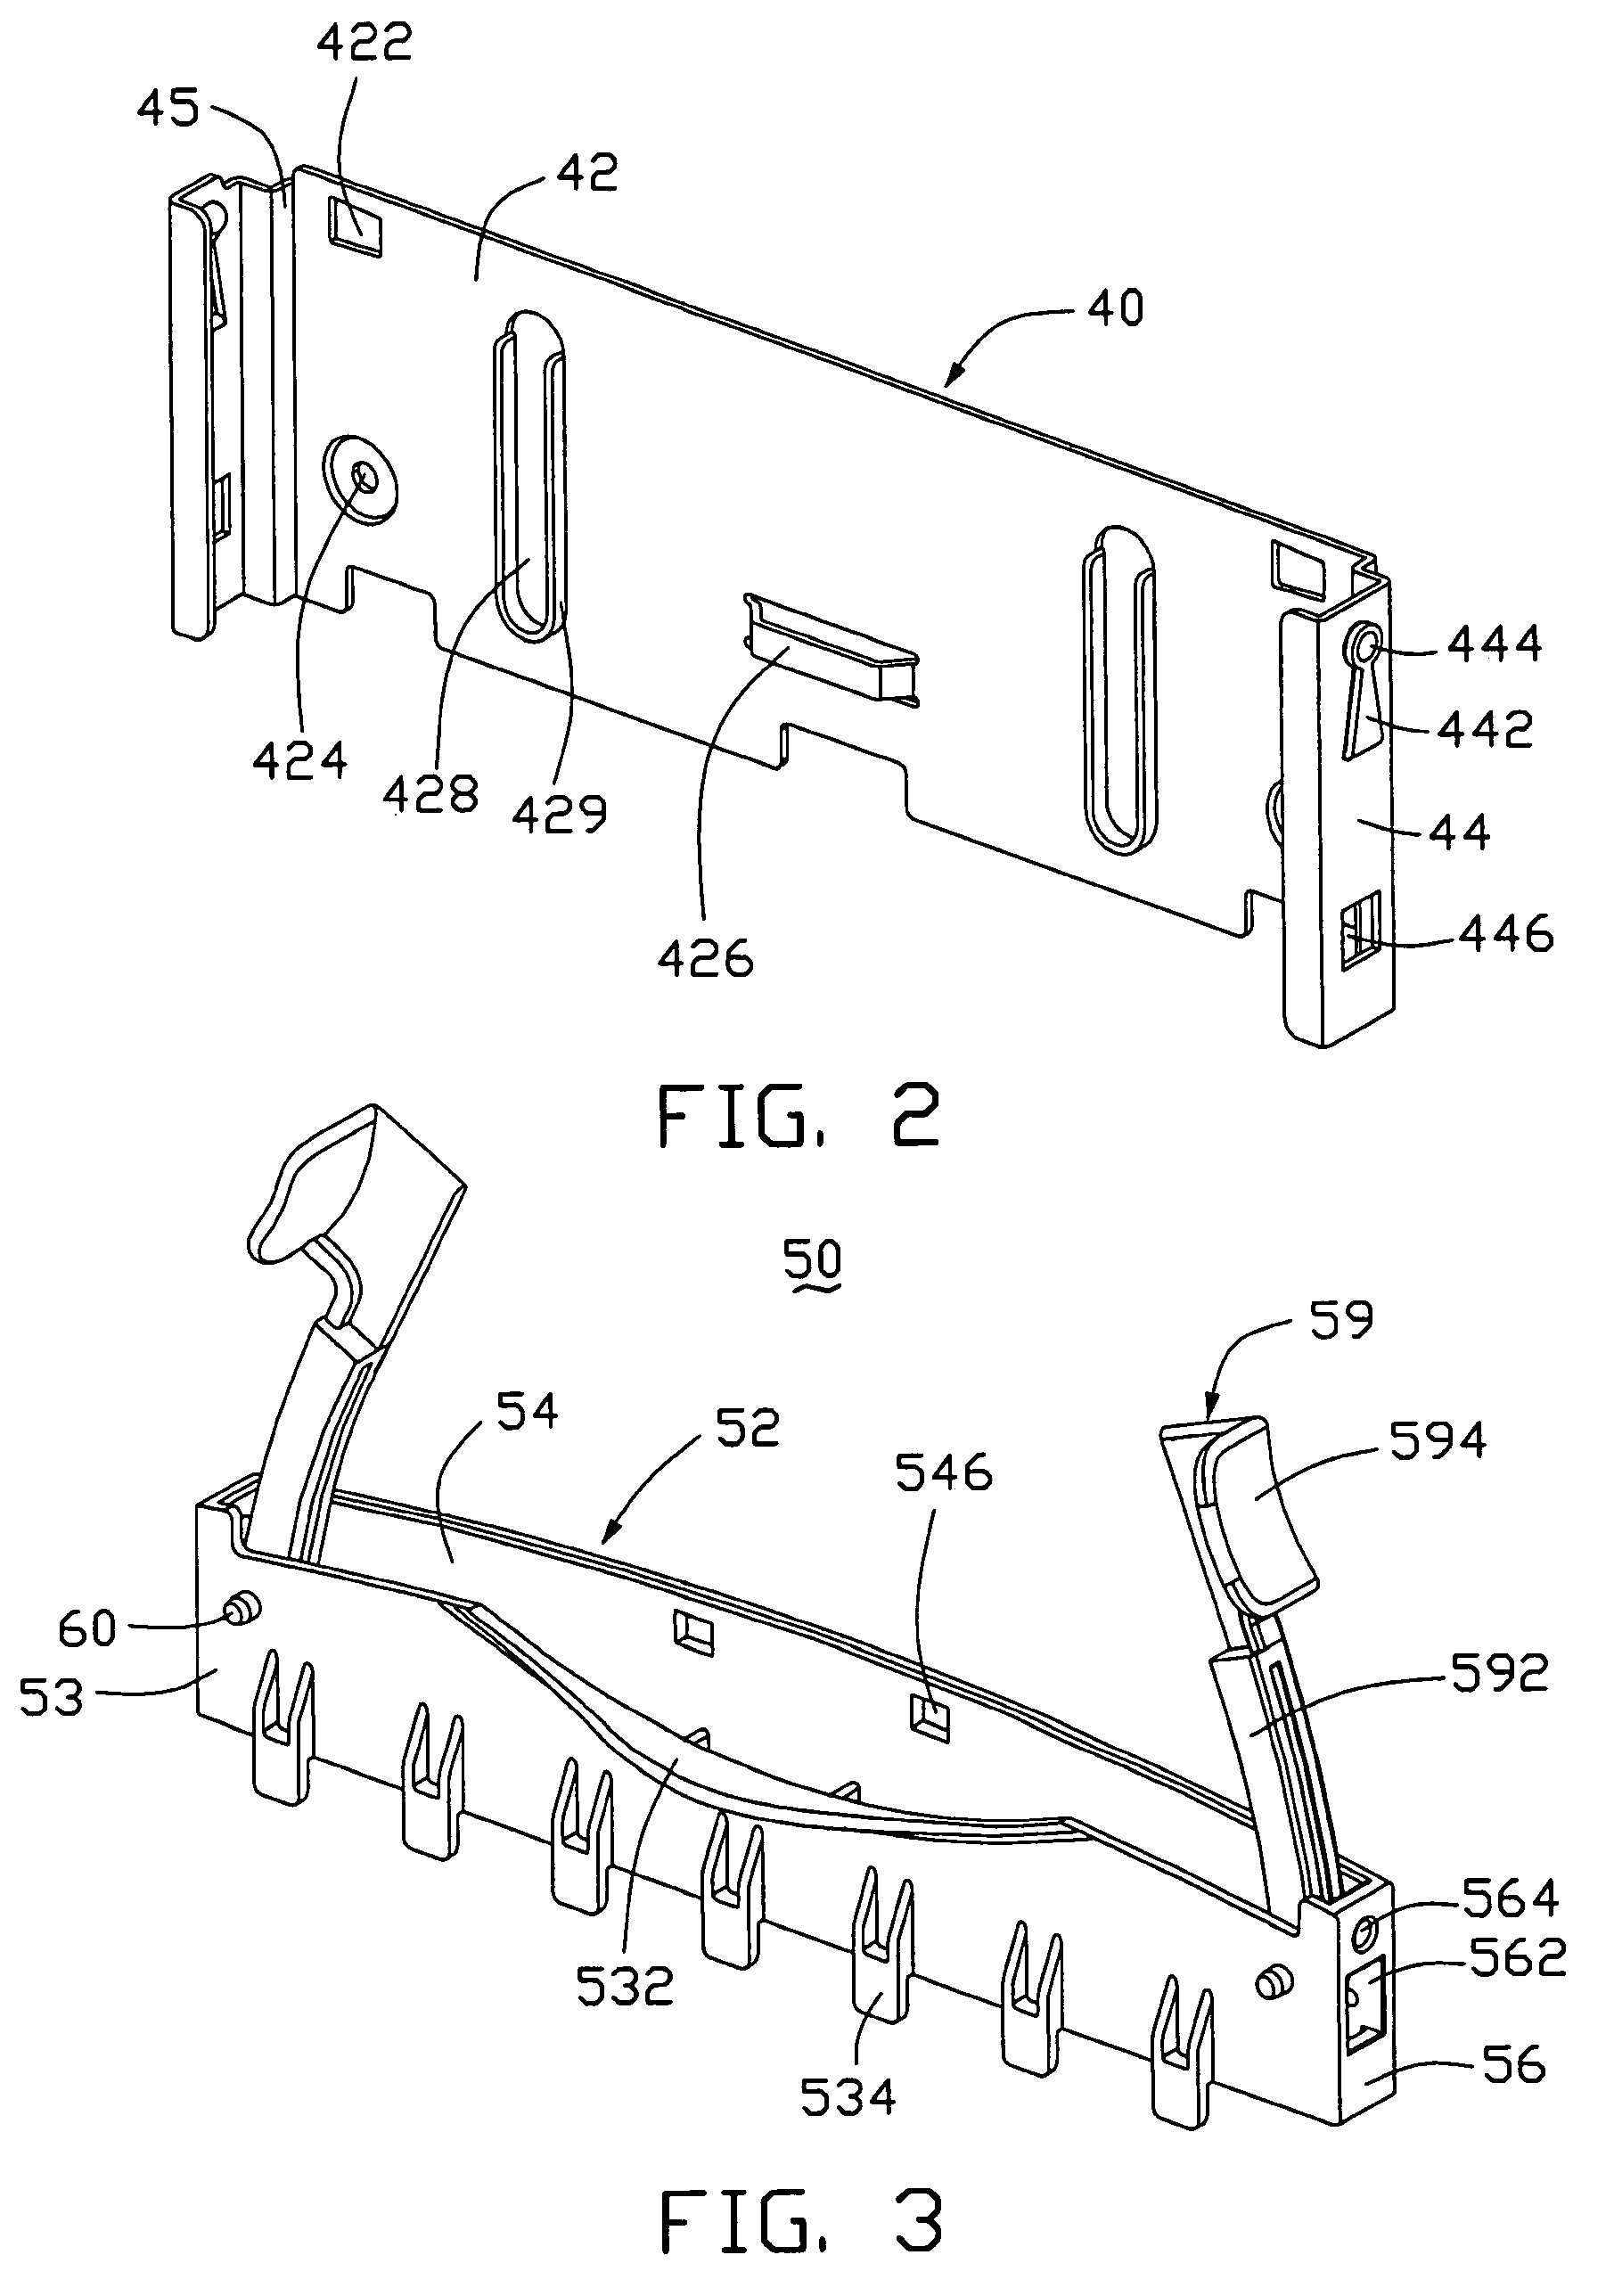 Mounting apparatus for expansion cards